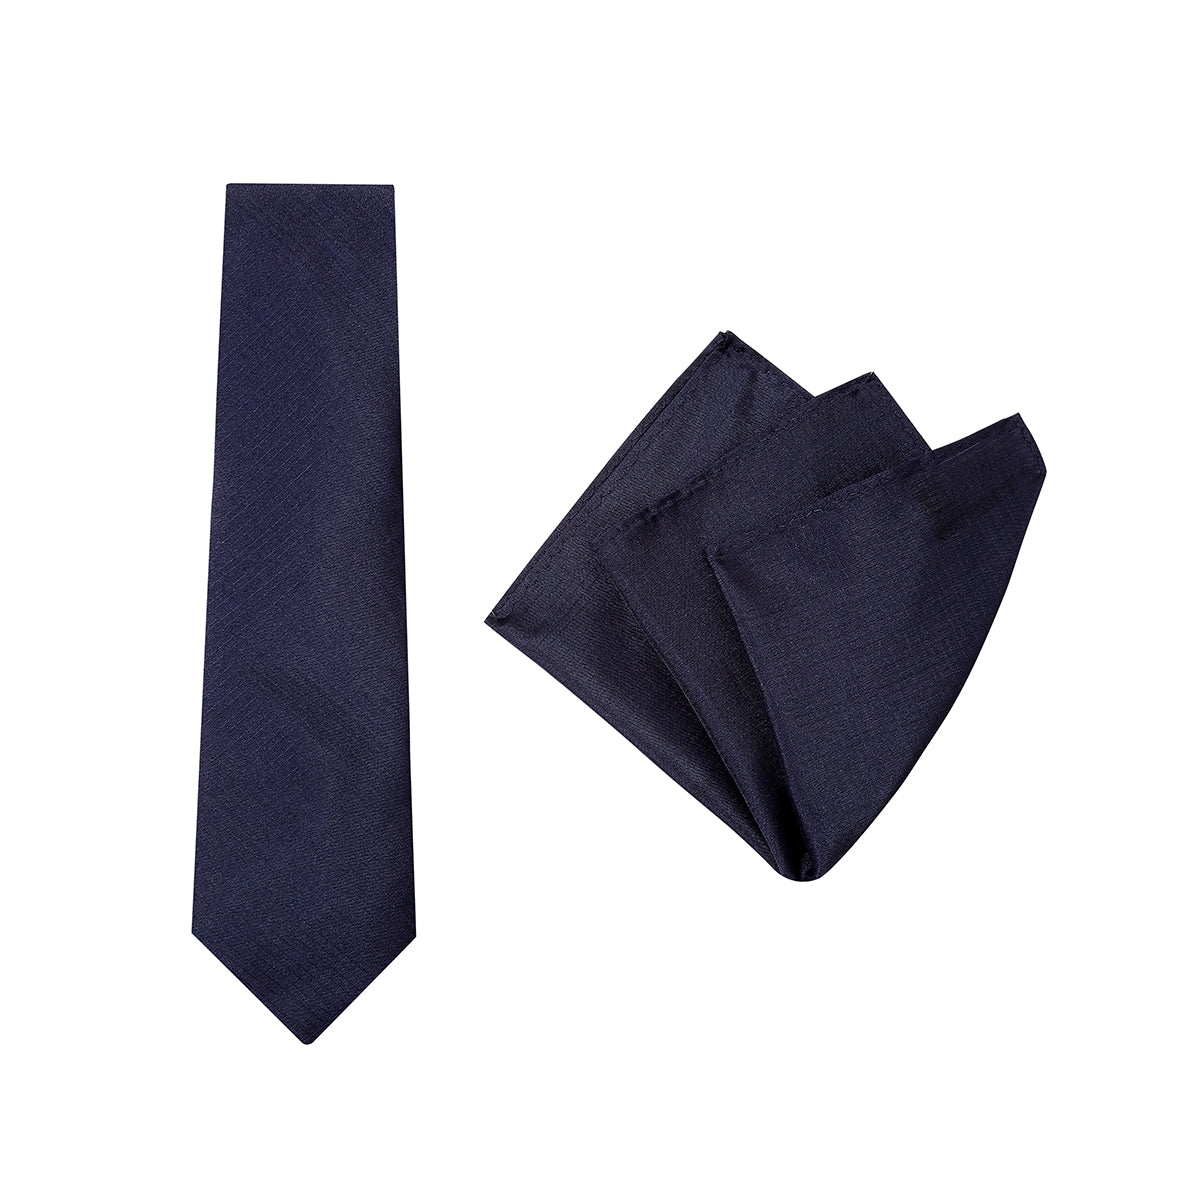 TIE + POCKET SQUARE SET. Plain. Midnight. Supplied with matching pocket square.-Ties-PEROZ Accessories